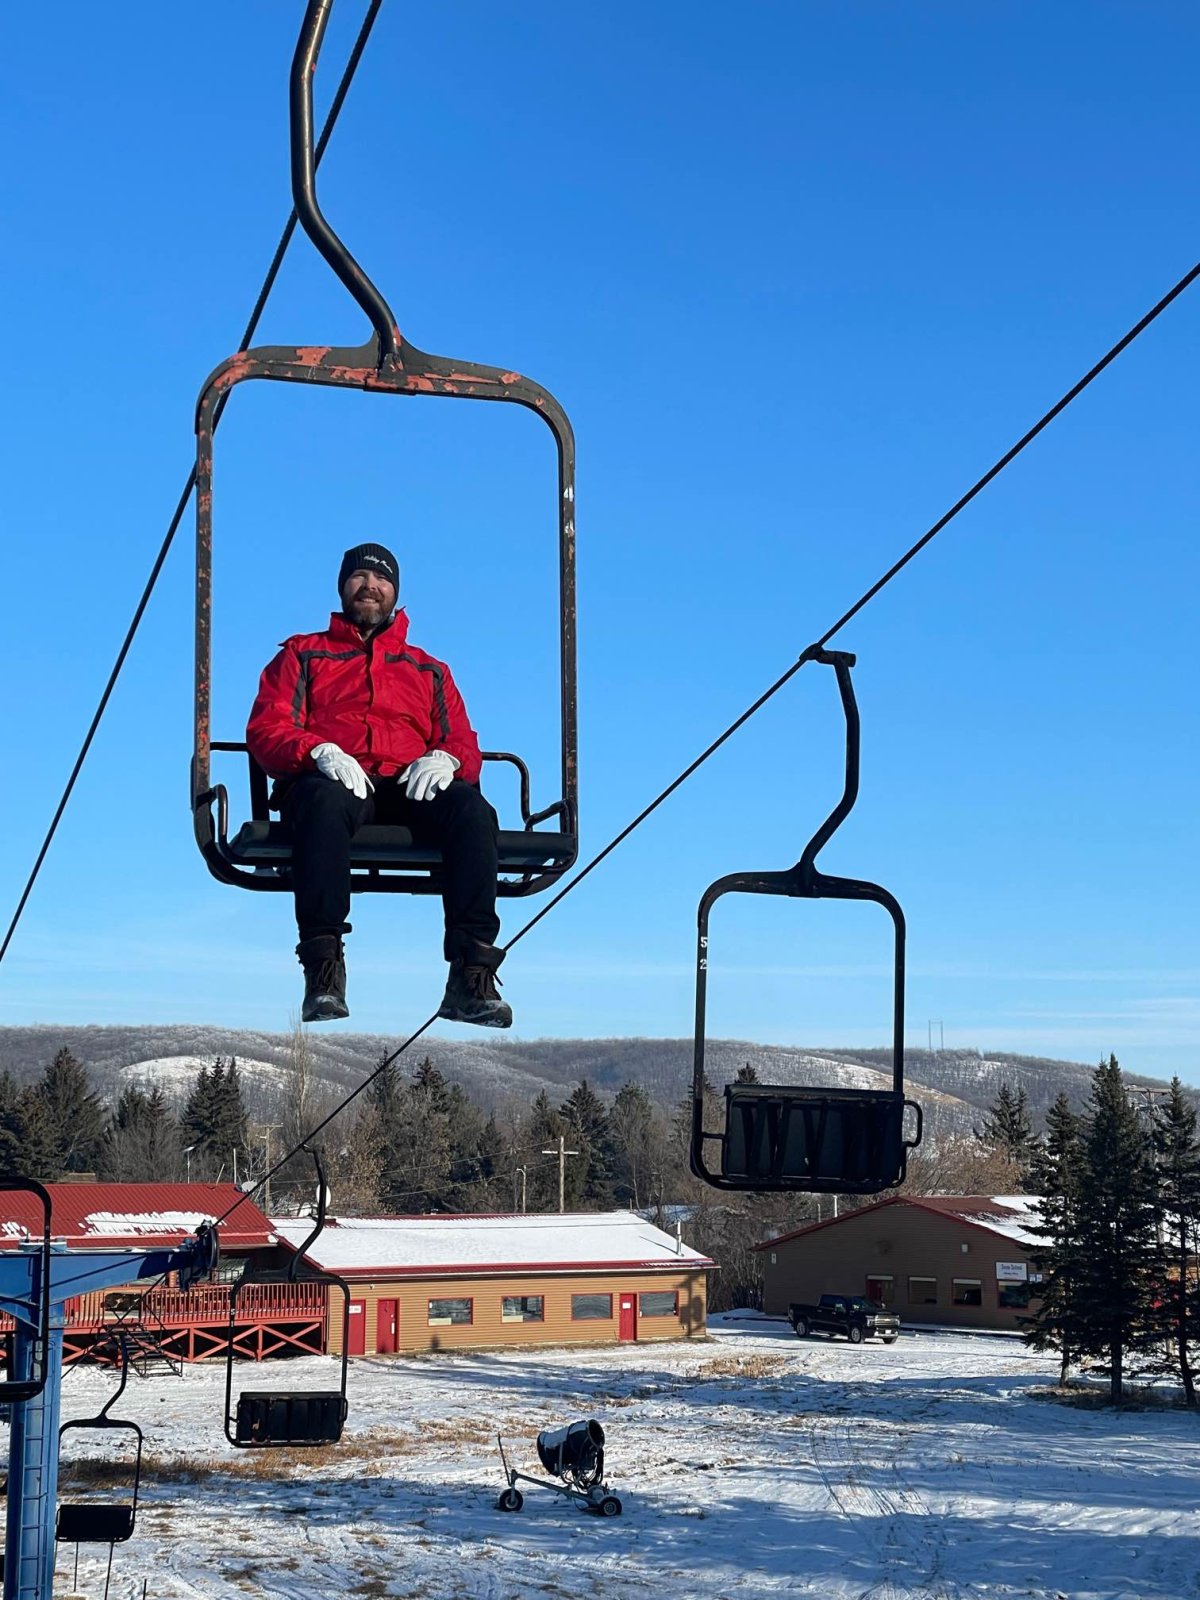 New owners of Holiday Mountain Resort in southern Manitoba say they're aiming to reopen the slopes later this month. Previous owners had said drought conditions in the area this summer would mean the hill wouldn't open this season.